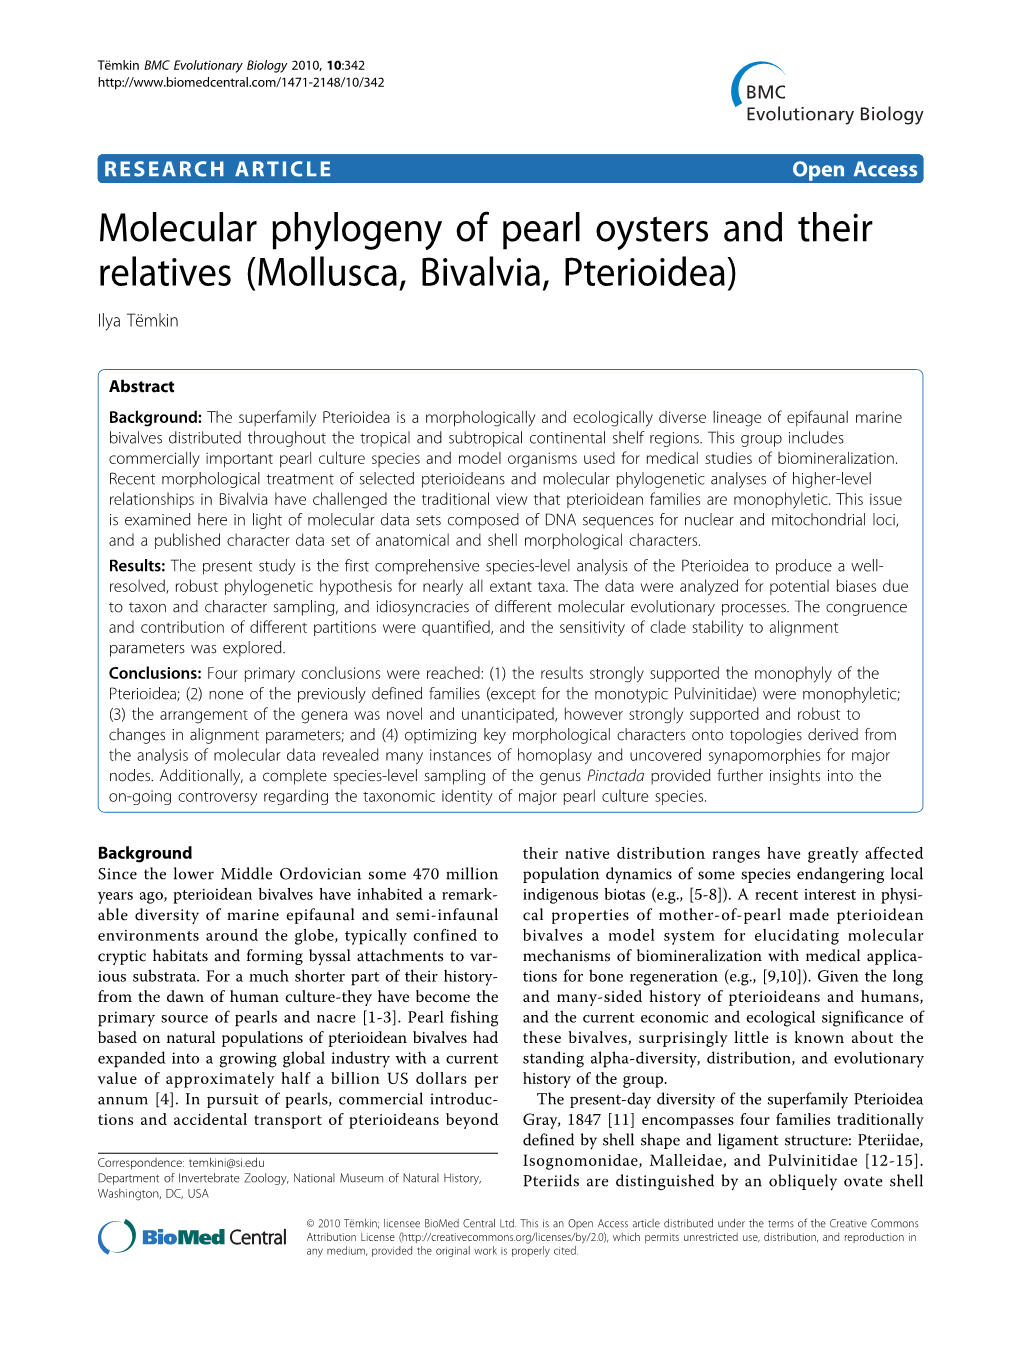 Molecular Phylogeny of Pearl Oysters and Their Relatives (Mollusca, Bivalvia, Pterioidea) Ilya Tëmkin